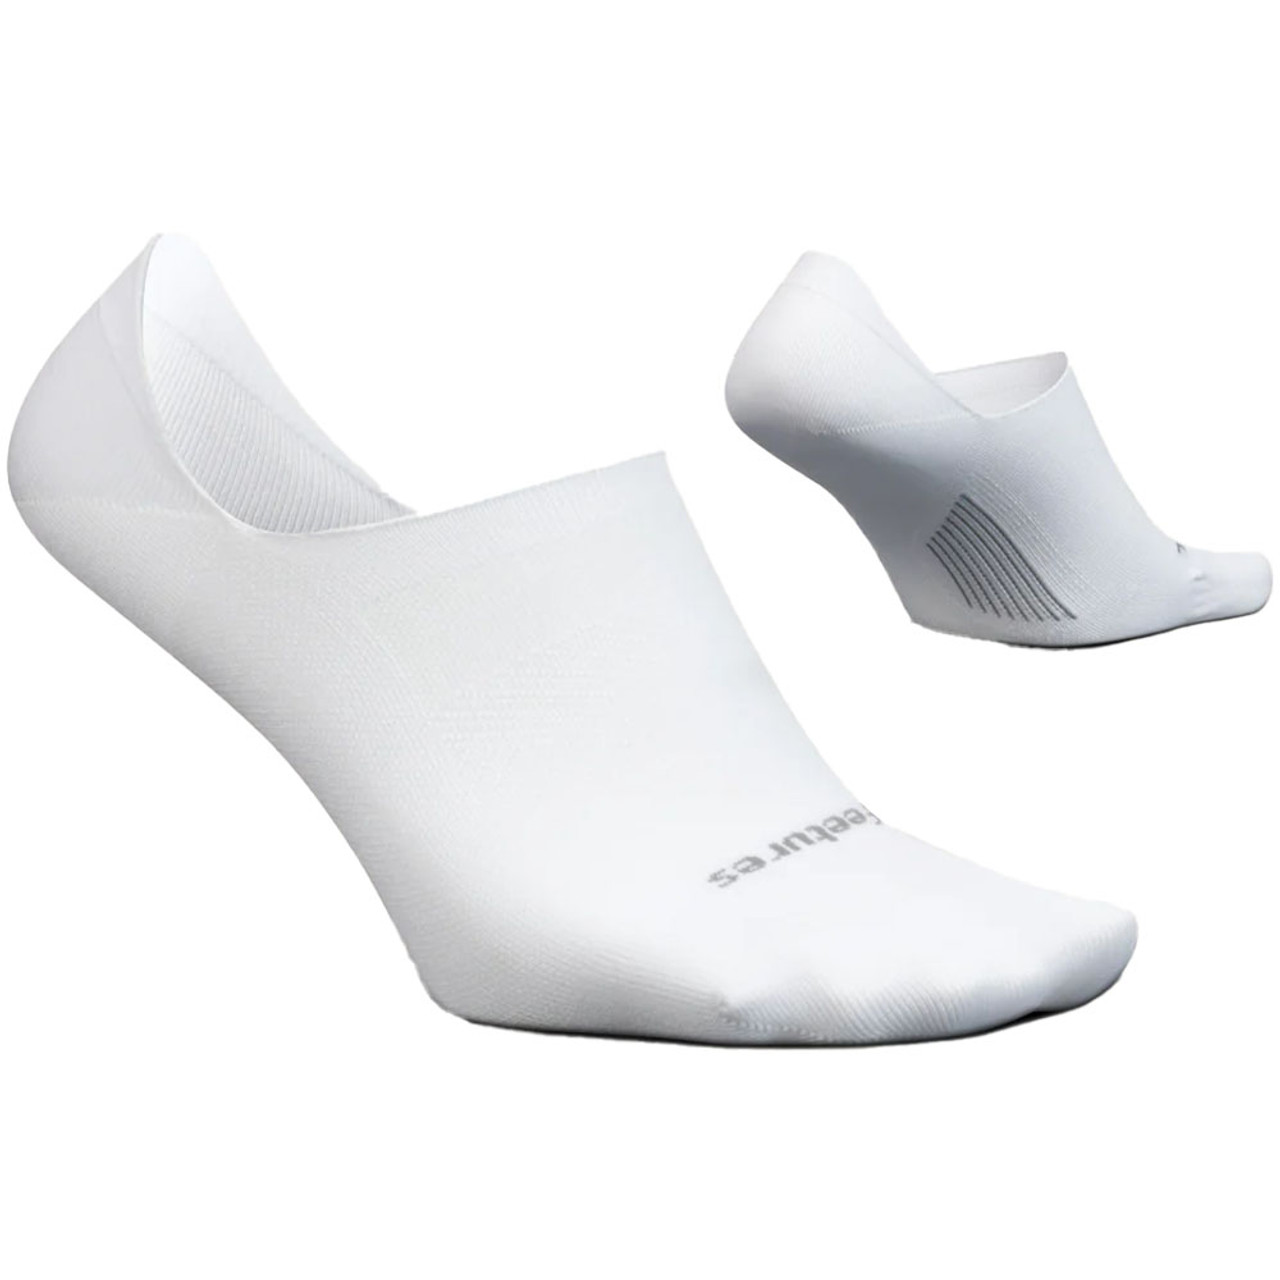 Feetures Elite Light Invisible Socks - | Eagle Outfitters